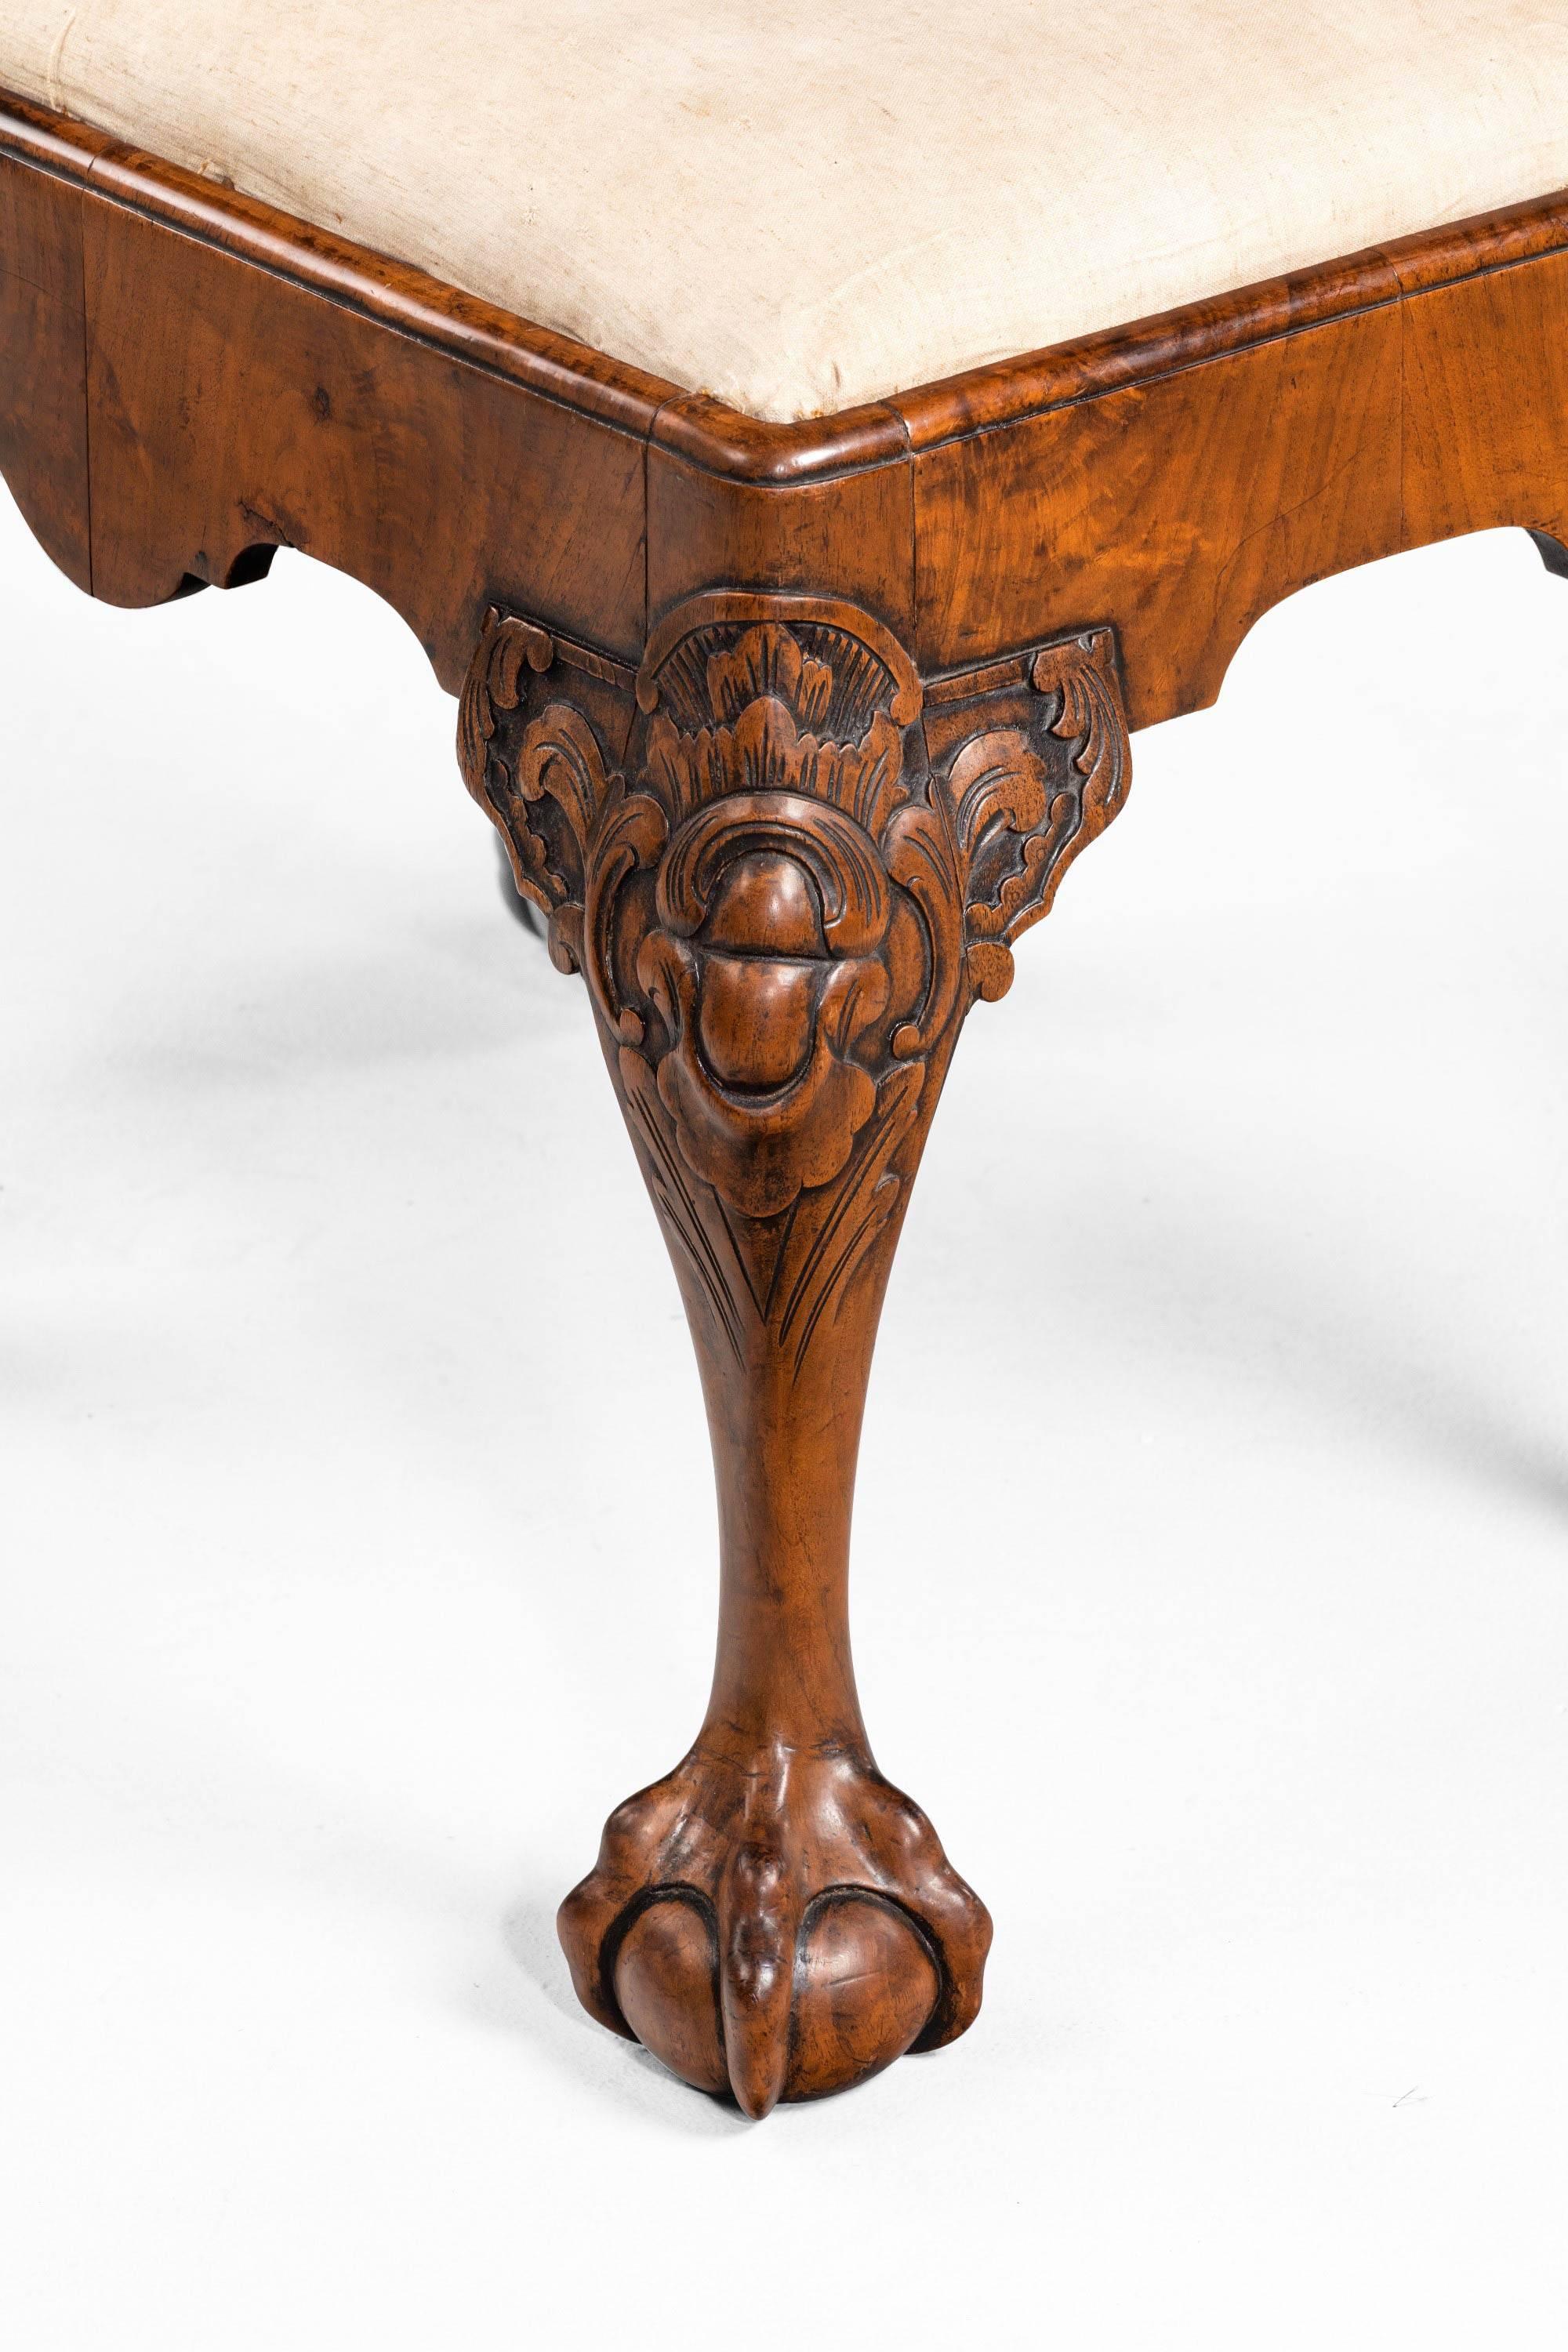 A finely carved walnut stool in mid-18th century style. With elaborately scrolled knees terminating in claw and ball feet. Lovely, faded, warm honey color.
      